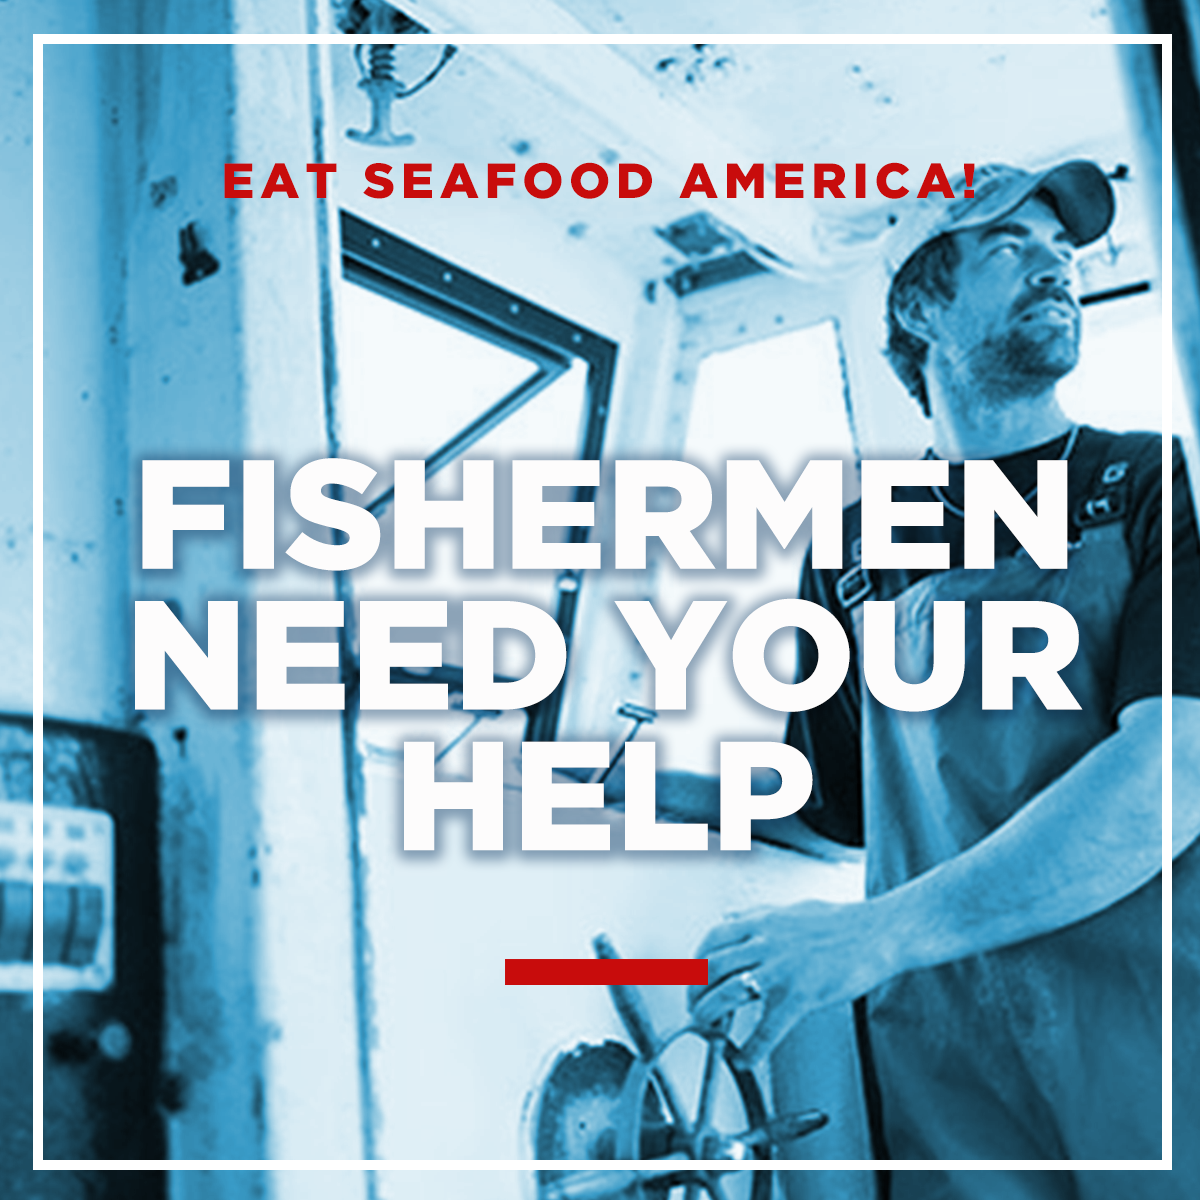 promotional image from Eat Seafood America campaign